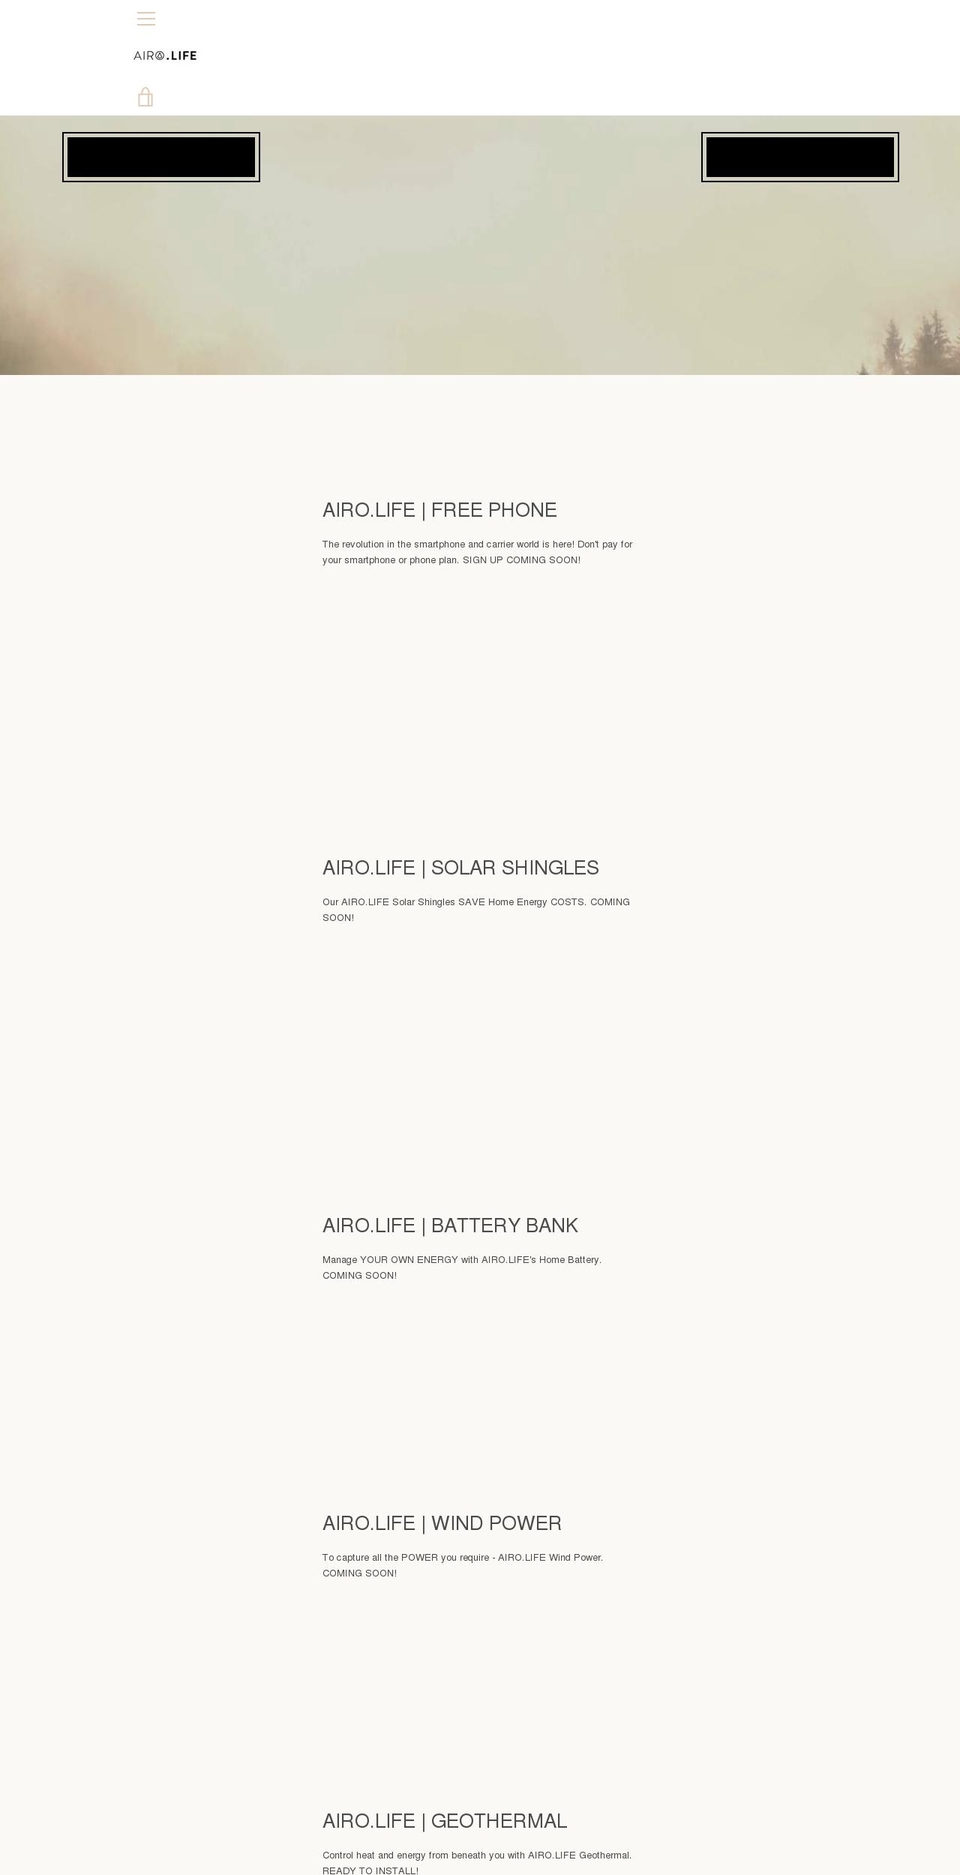 Narrative - Initial Shopify theme site example airo.life